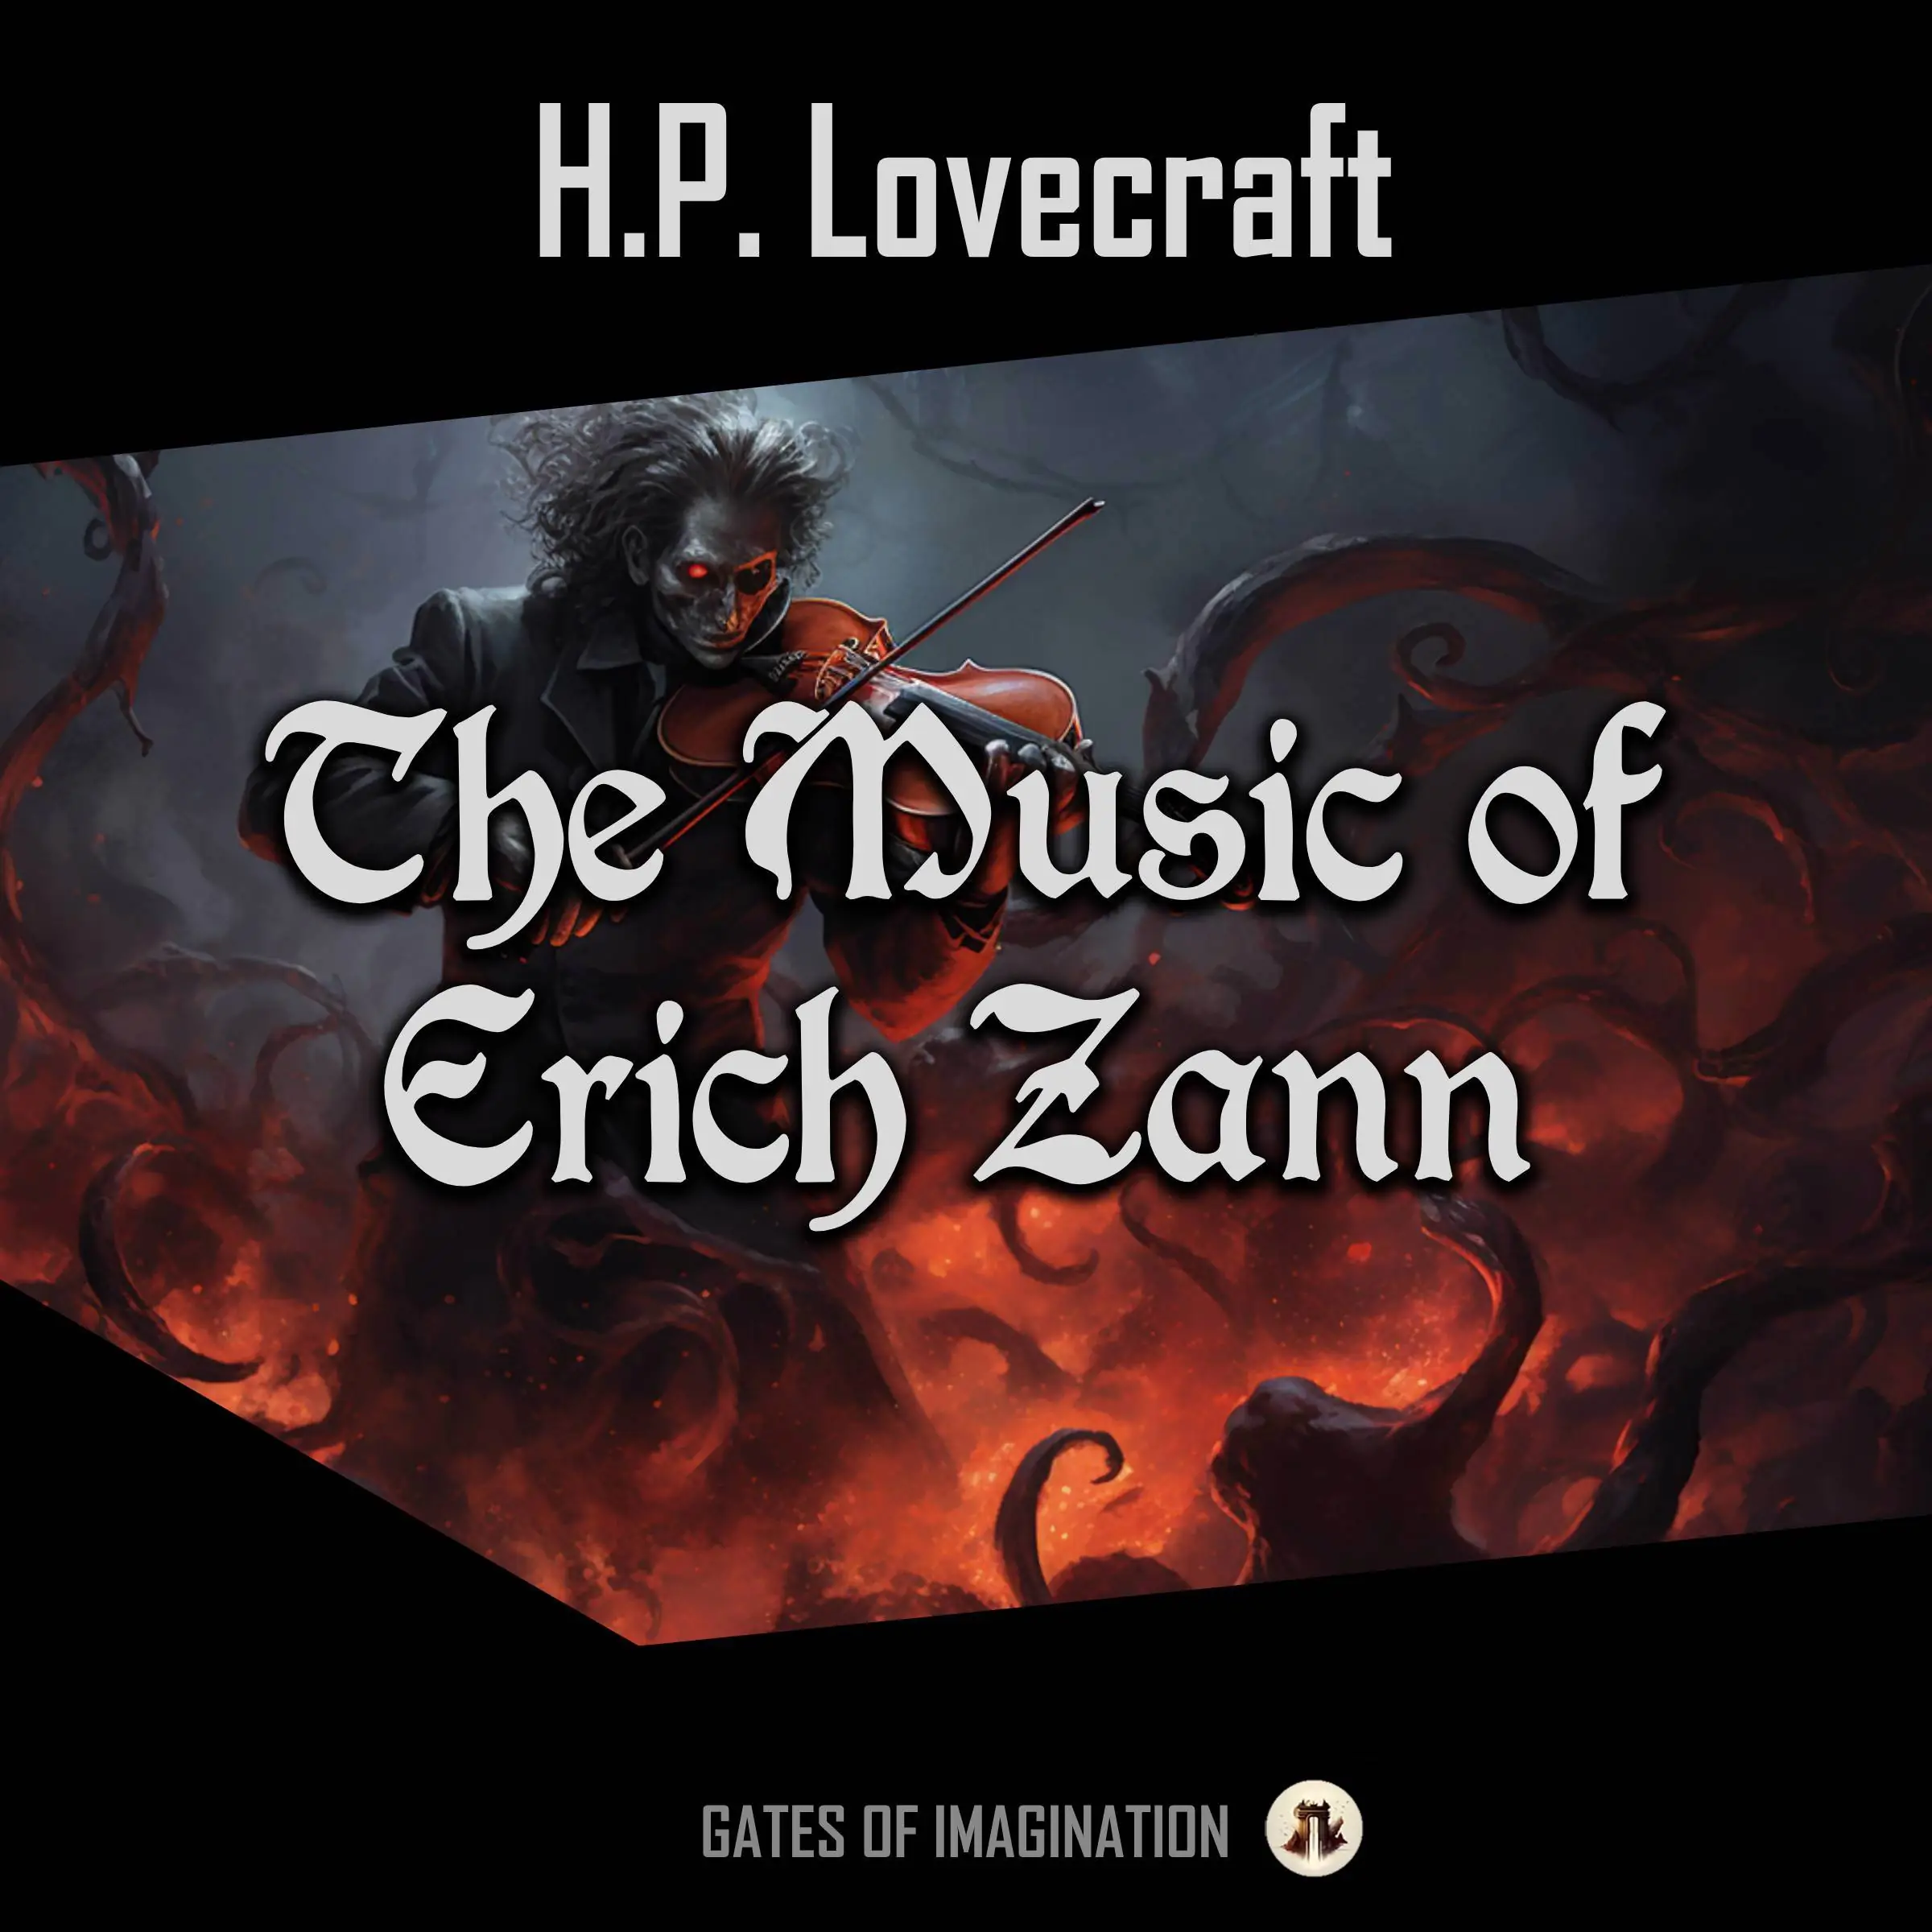 The Music of Erich Zann by H. P. Lovecraft Audiobook